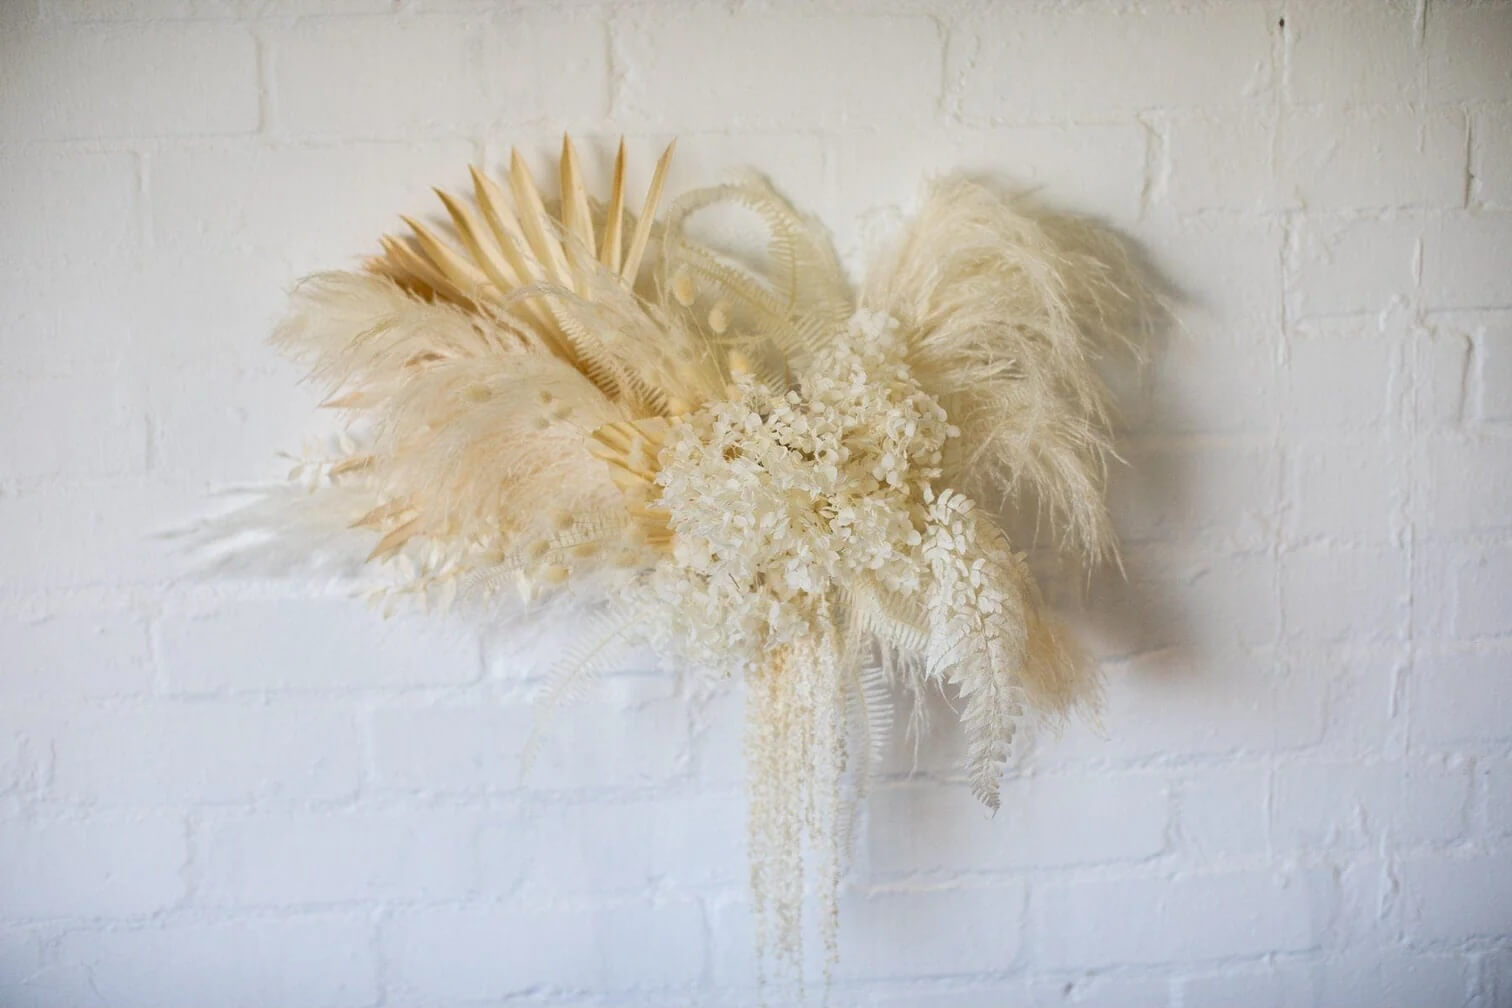 Trailing Amaranthus and Pampas Moongate dried floral wedding decor.